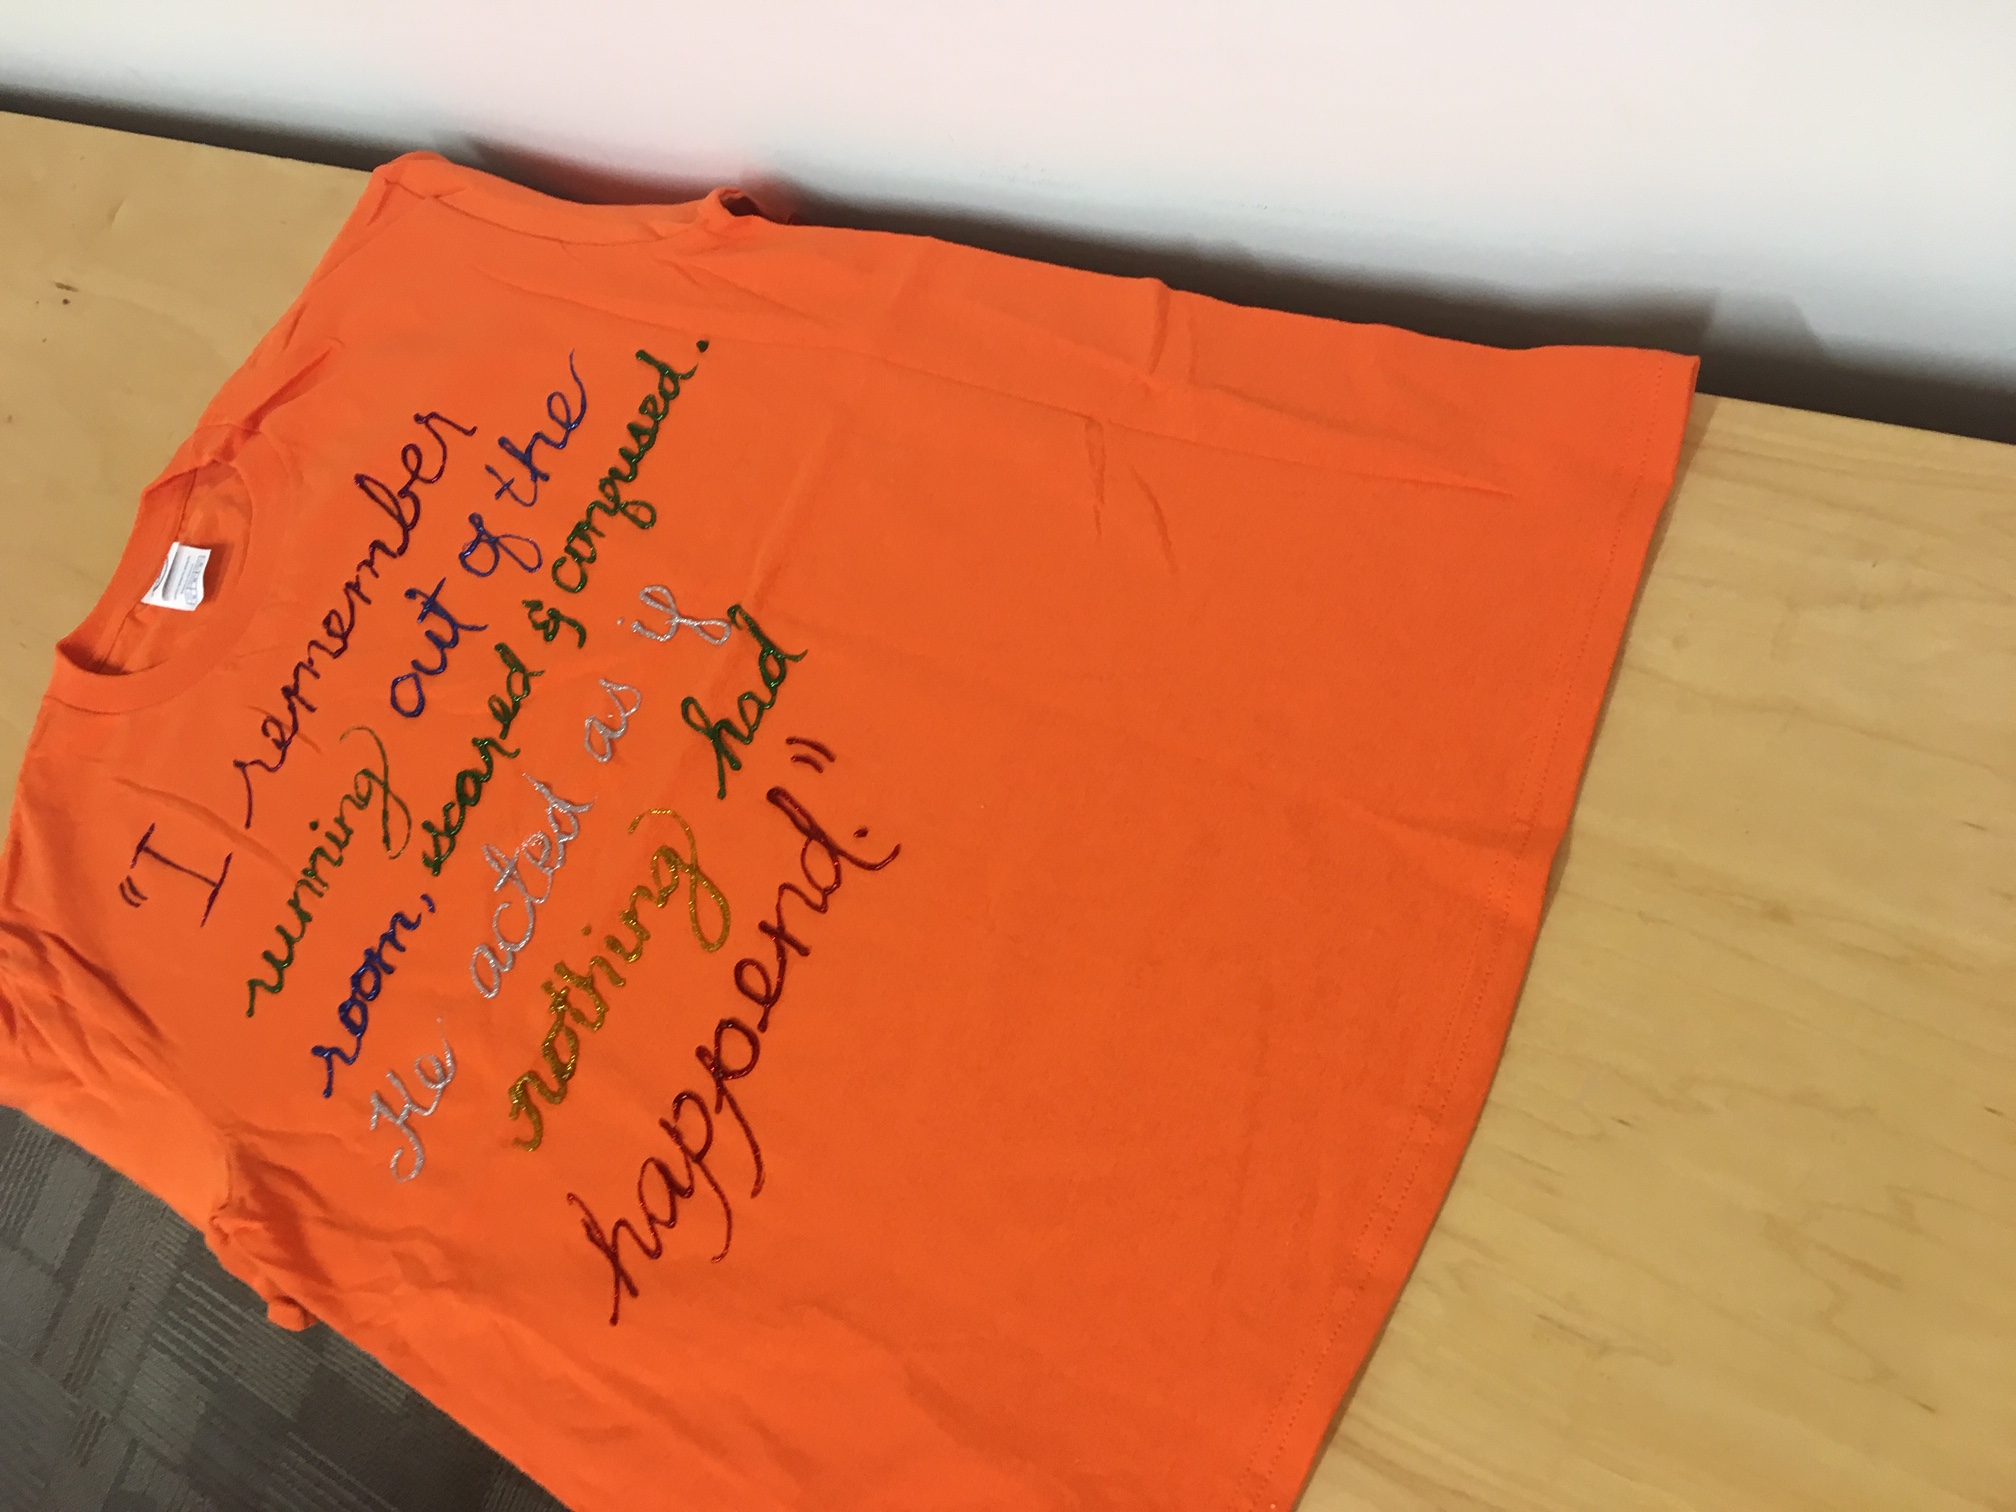 Photo of a t-shirt created by a survivor for the Clothesline Project on campus.